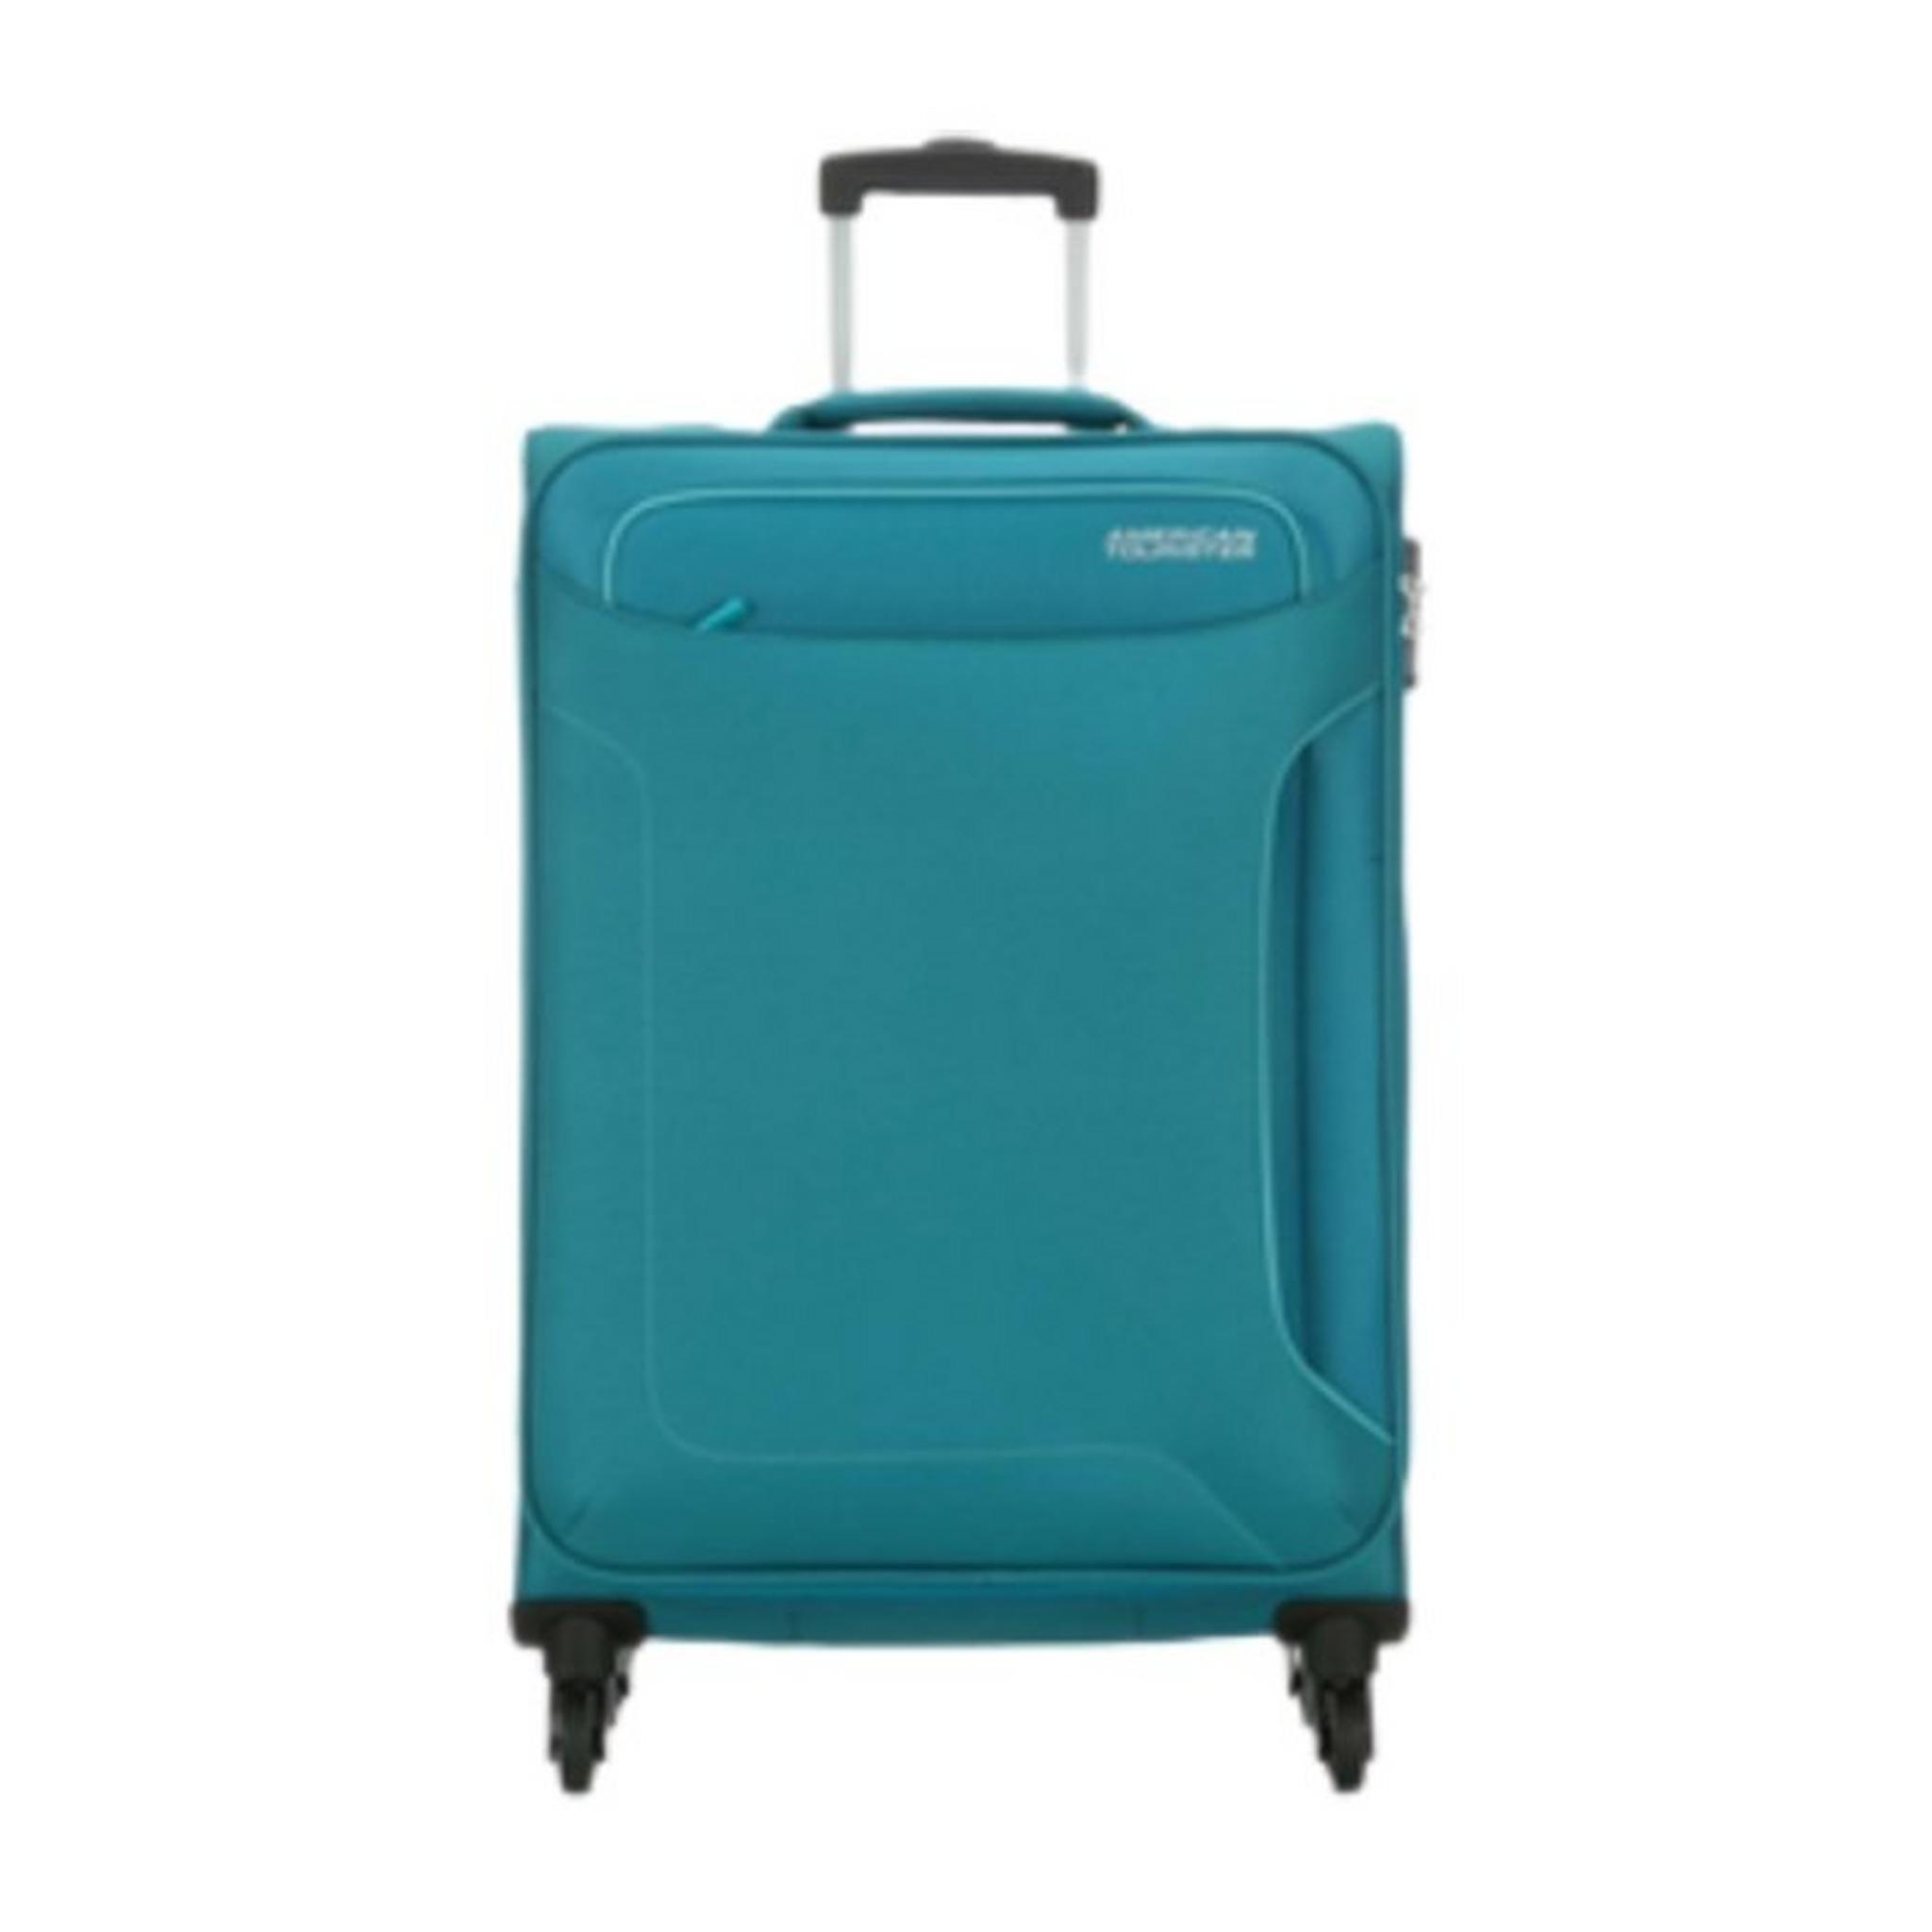 American Tourister Holiday Spinner Soft Luggage - 55CM Cabin Size - Teal